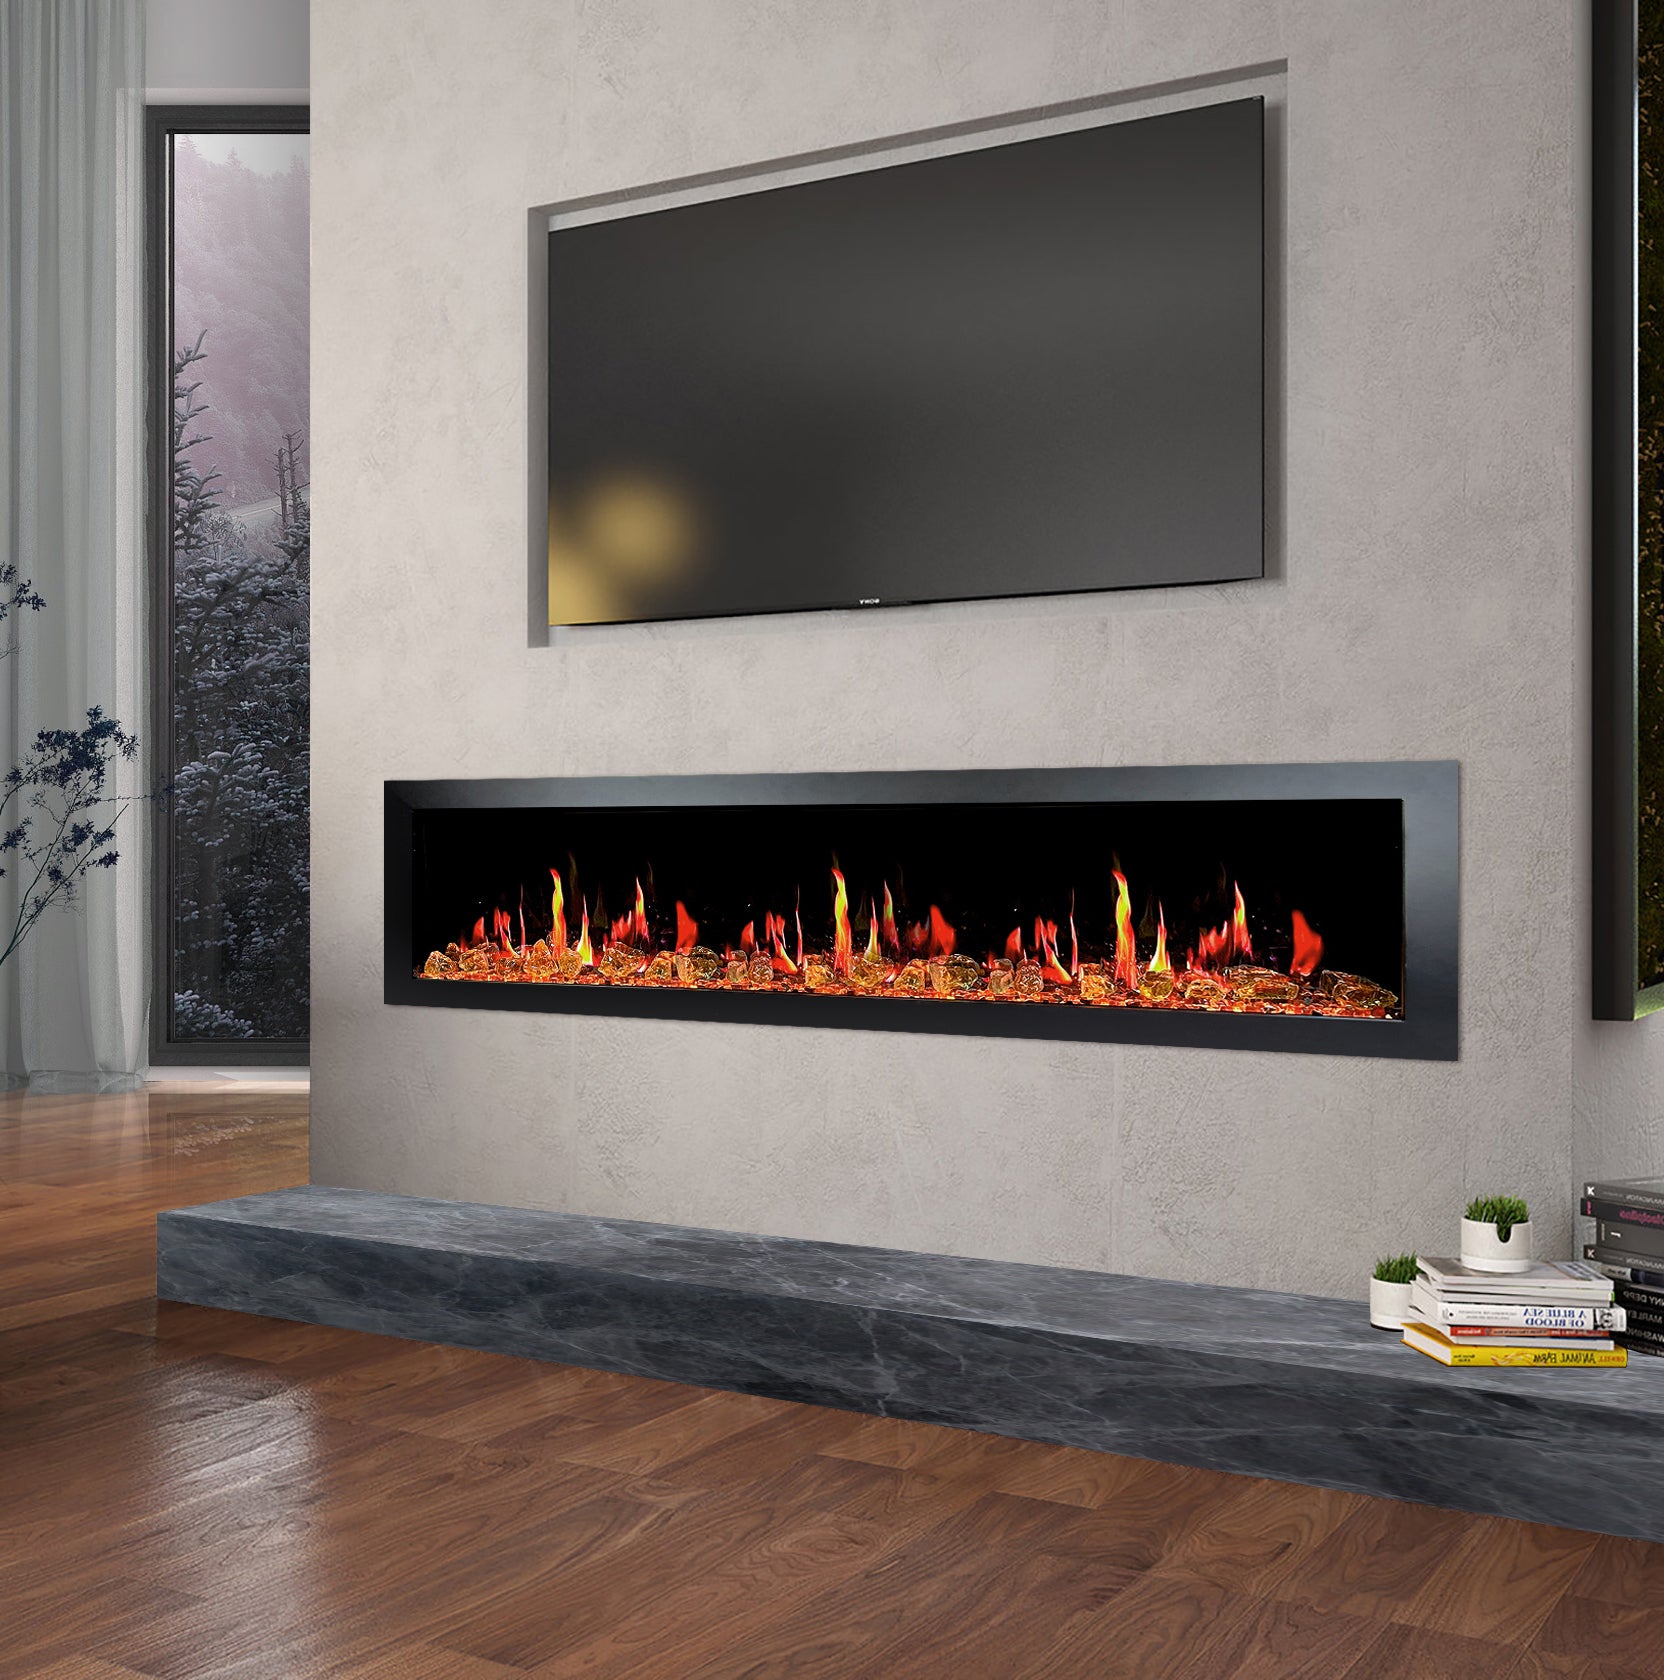 Litedeer Latitude II 68" Seamless Push-in Electric Fireplace + Reflective Fire Glass (Luster Copper)